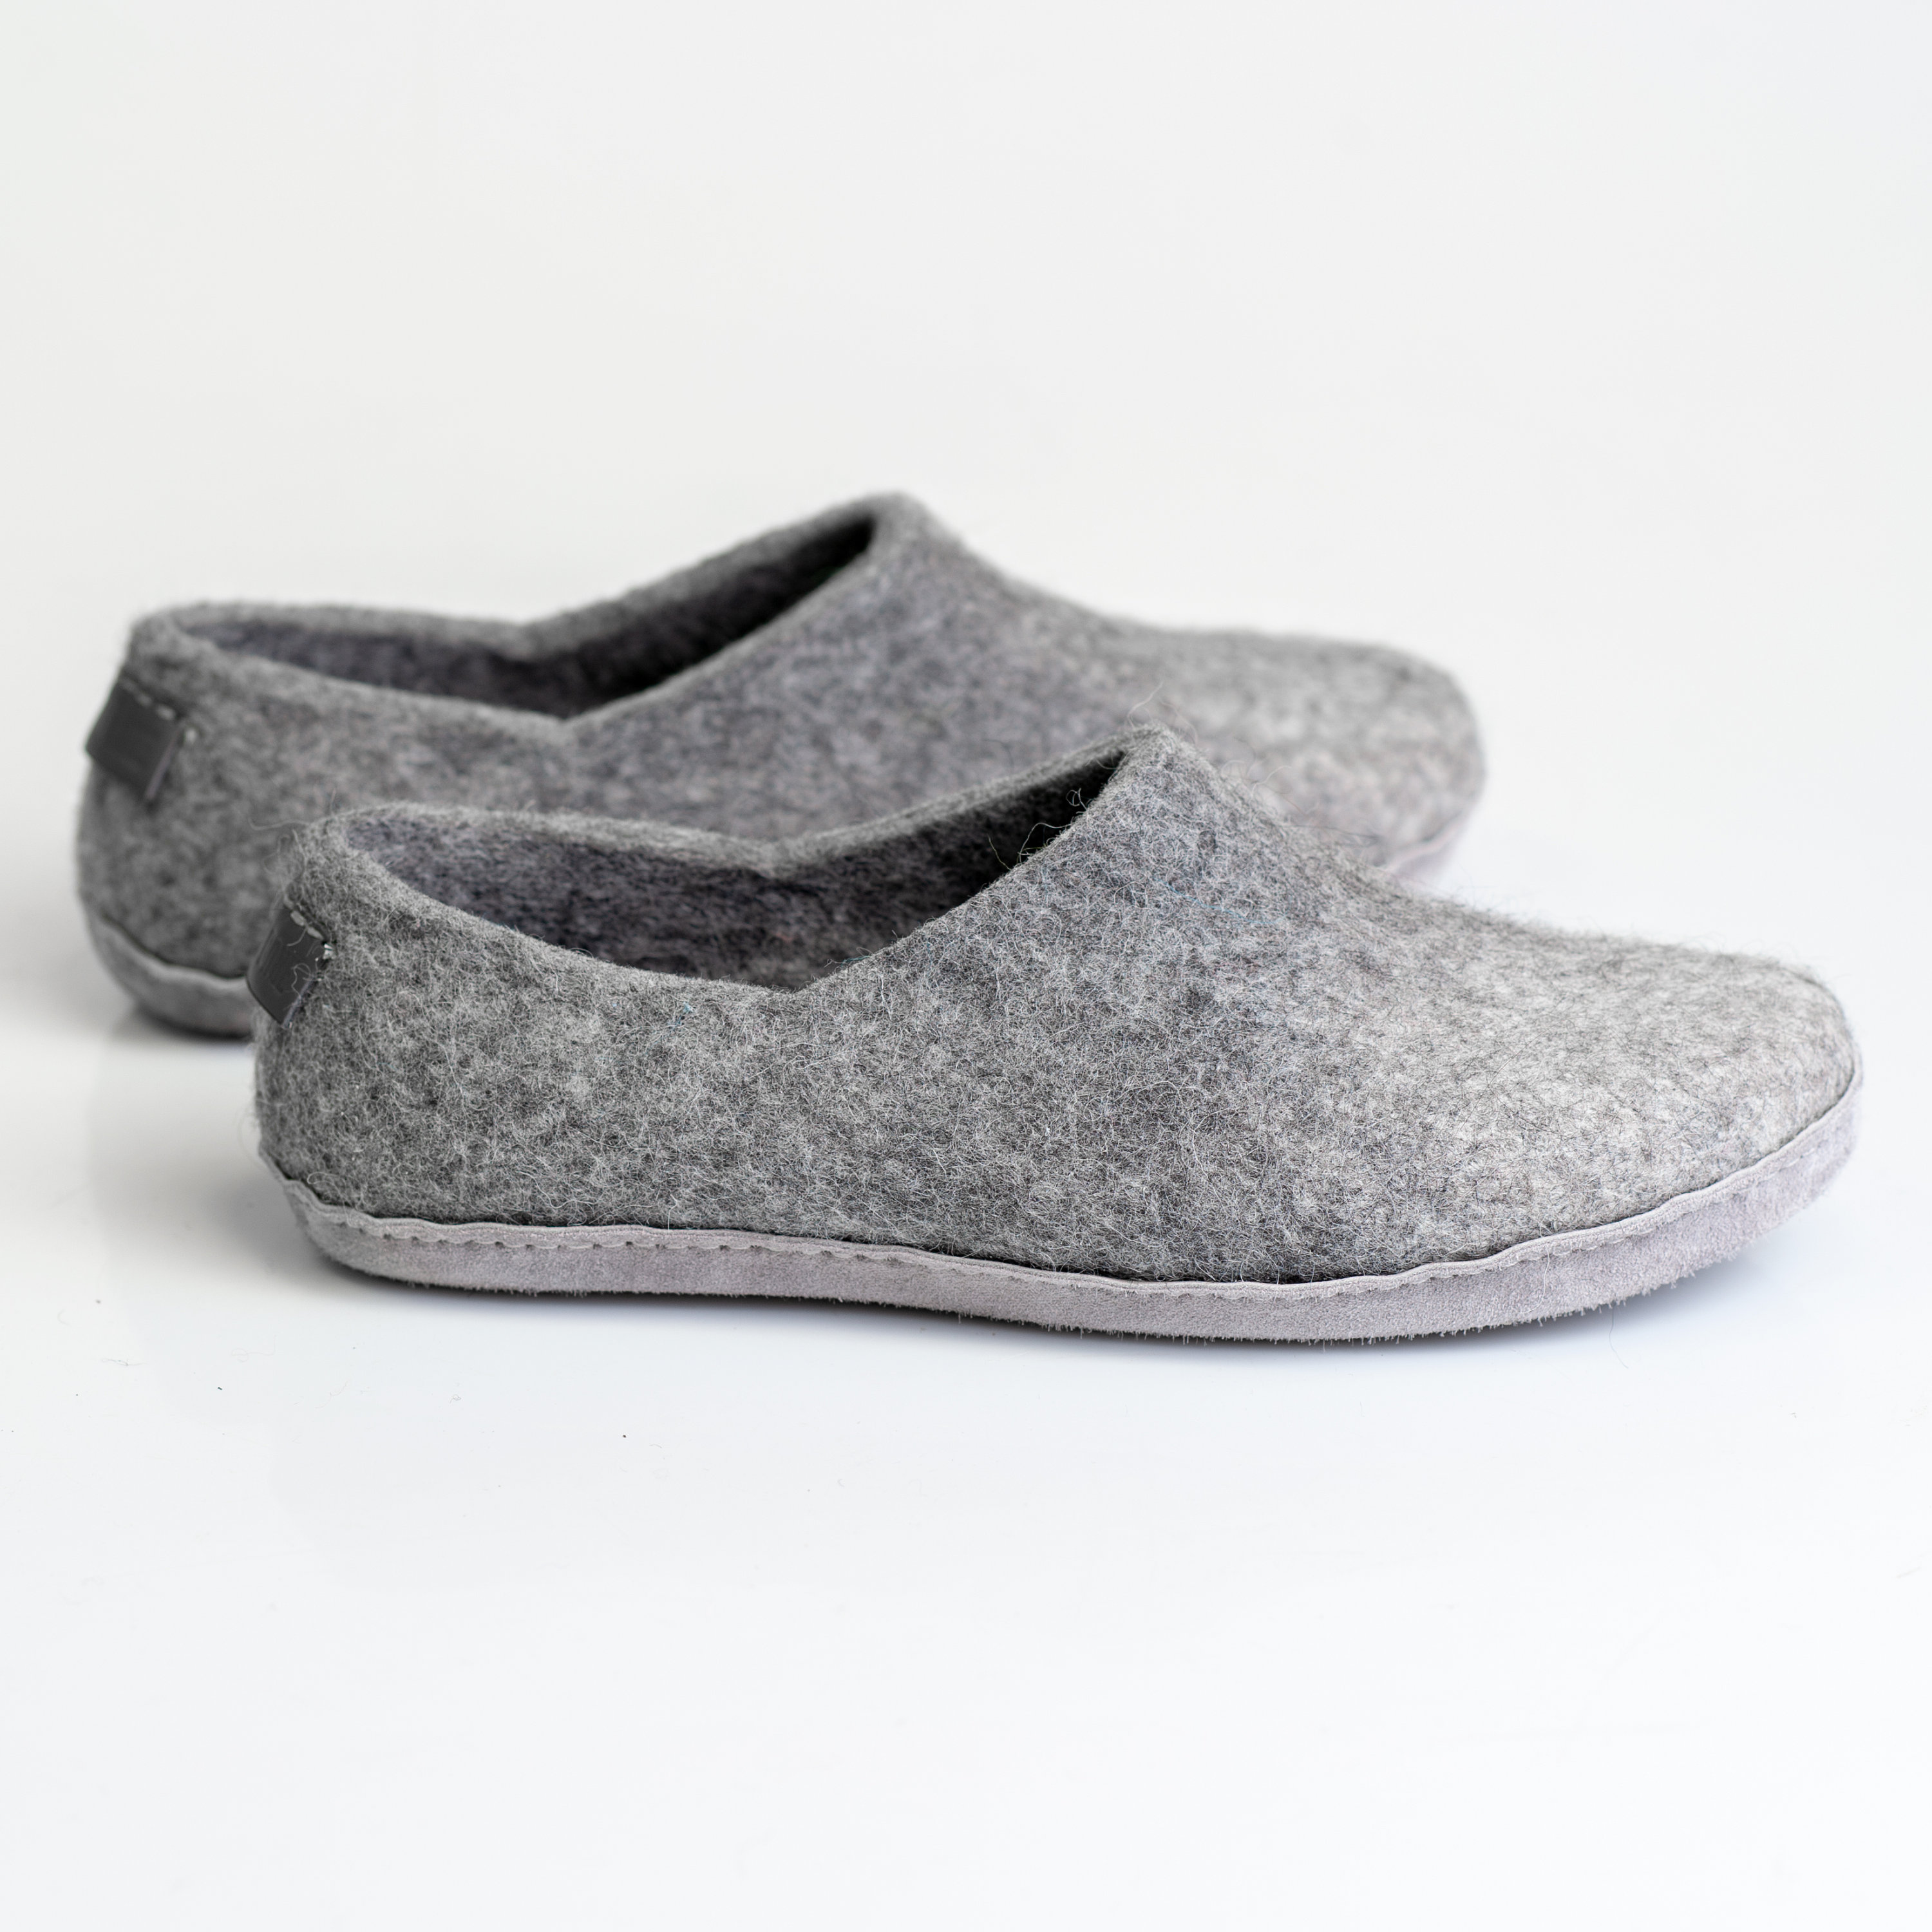 Men felted wool slippers clogs light grey ombre with Alpaca wool and ...